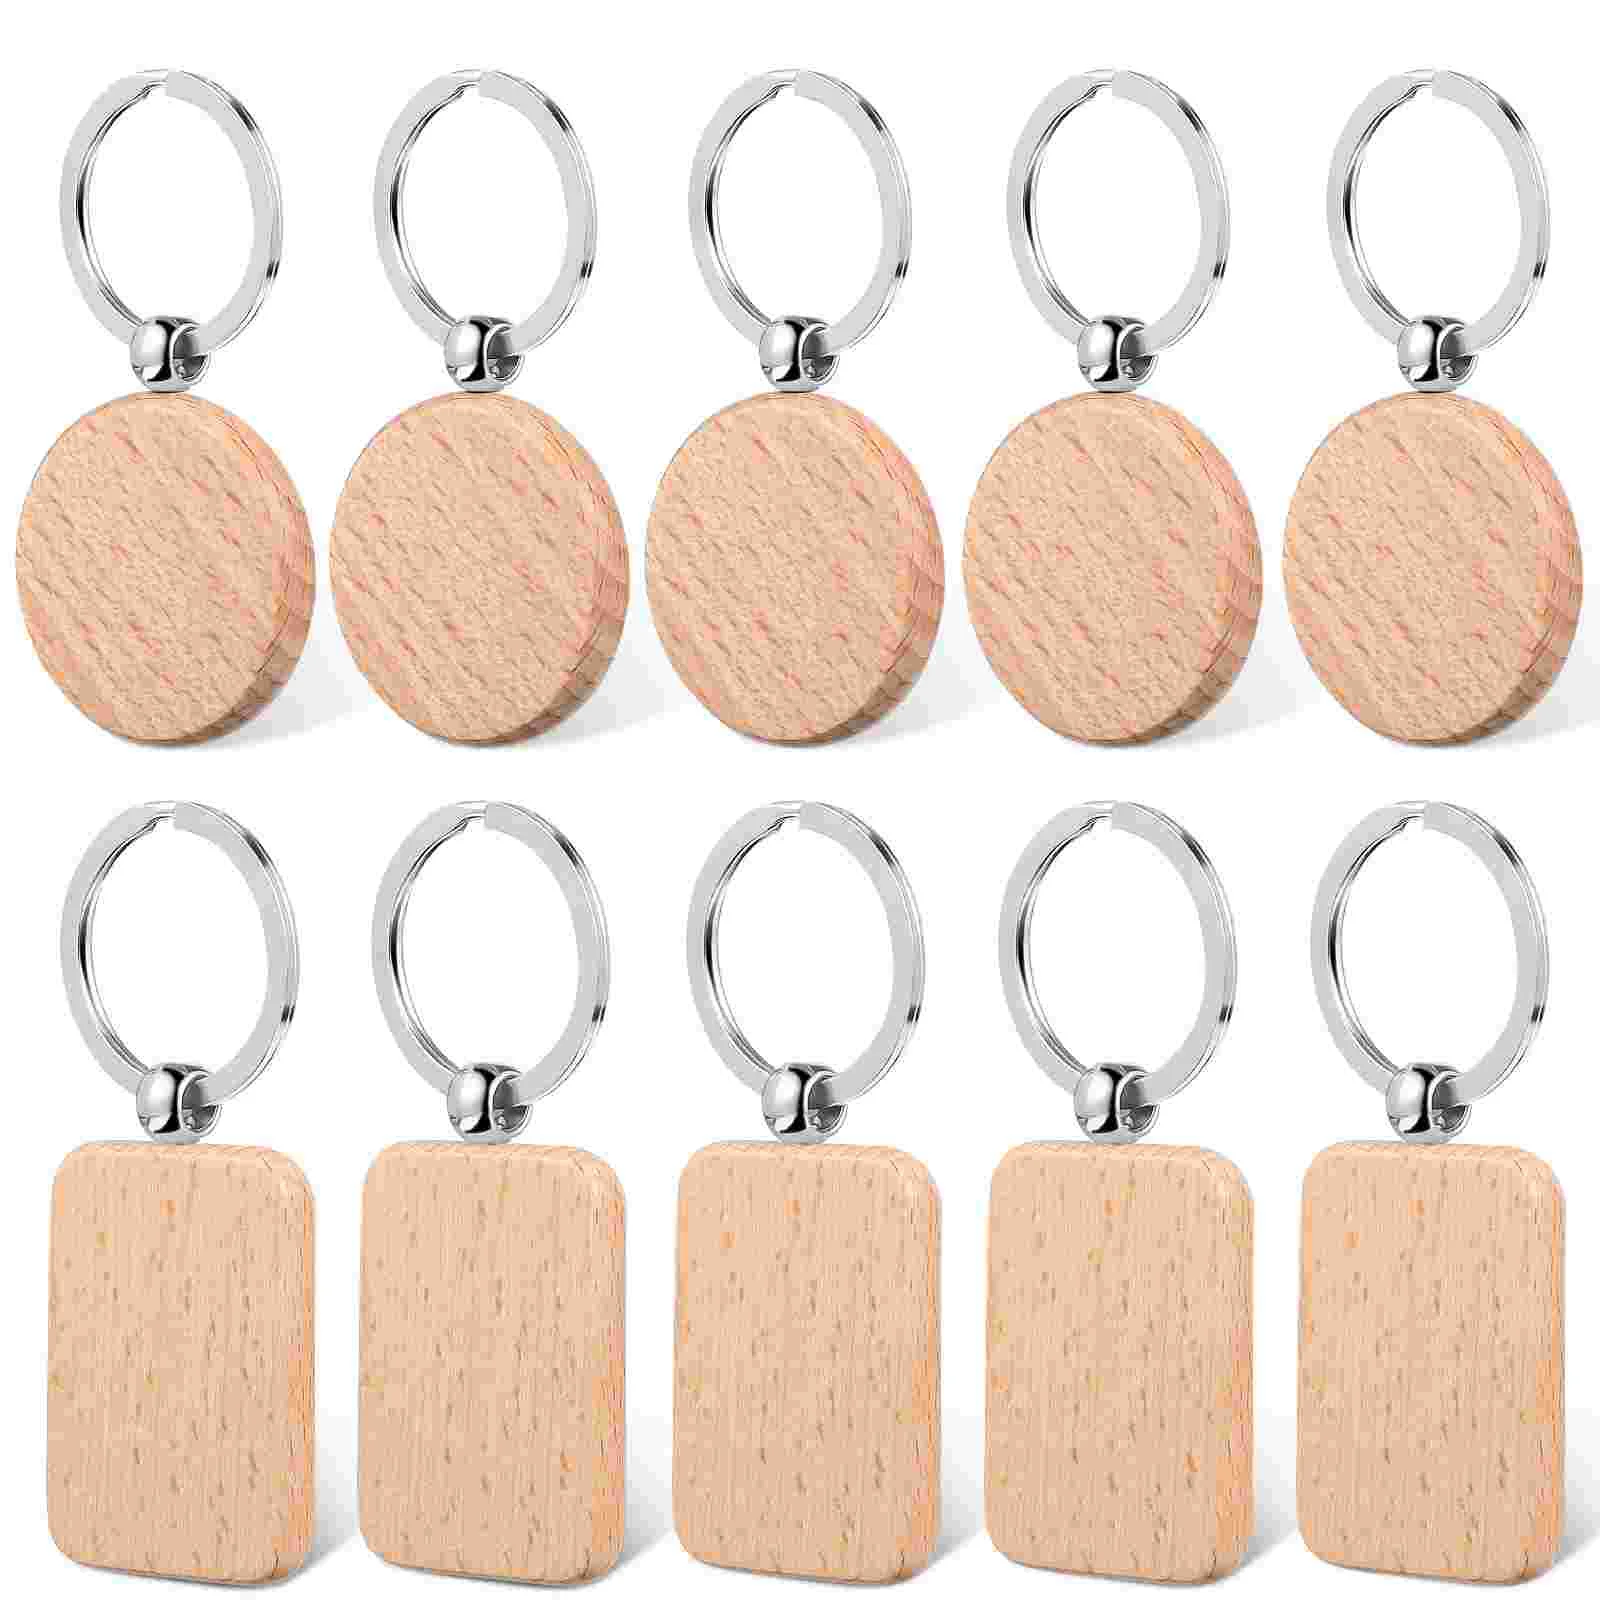 

10 Pcs Wooden Keychain Blanks Round Rectangle Cds Keychains Circle Labels Engraving Tags Craft